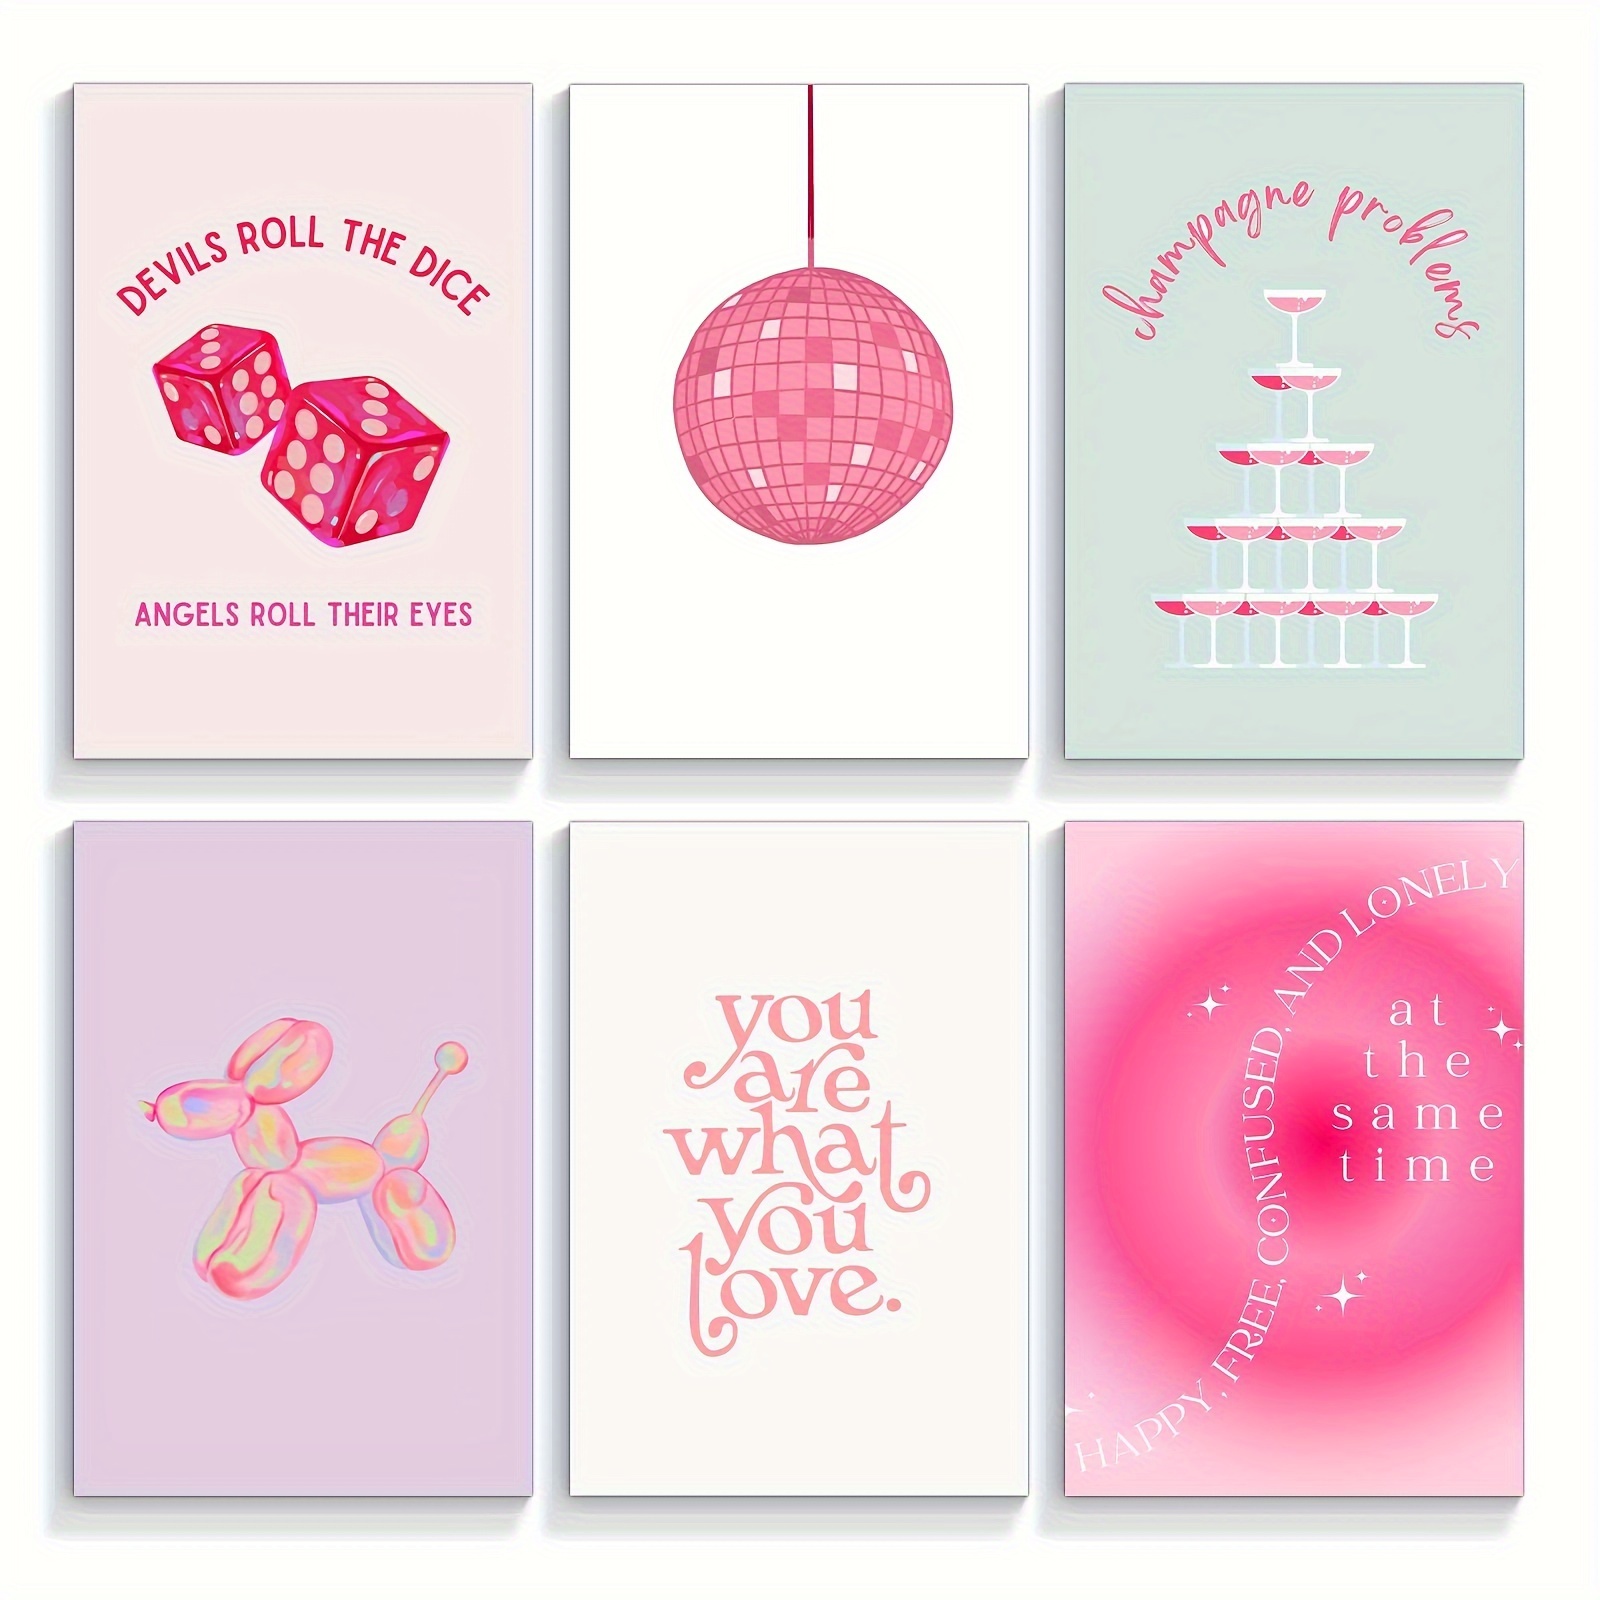 Taylor Swift Stickers for Sale  Taylor swift drawing, Taylor swift lyrics, Taylor  swift posters